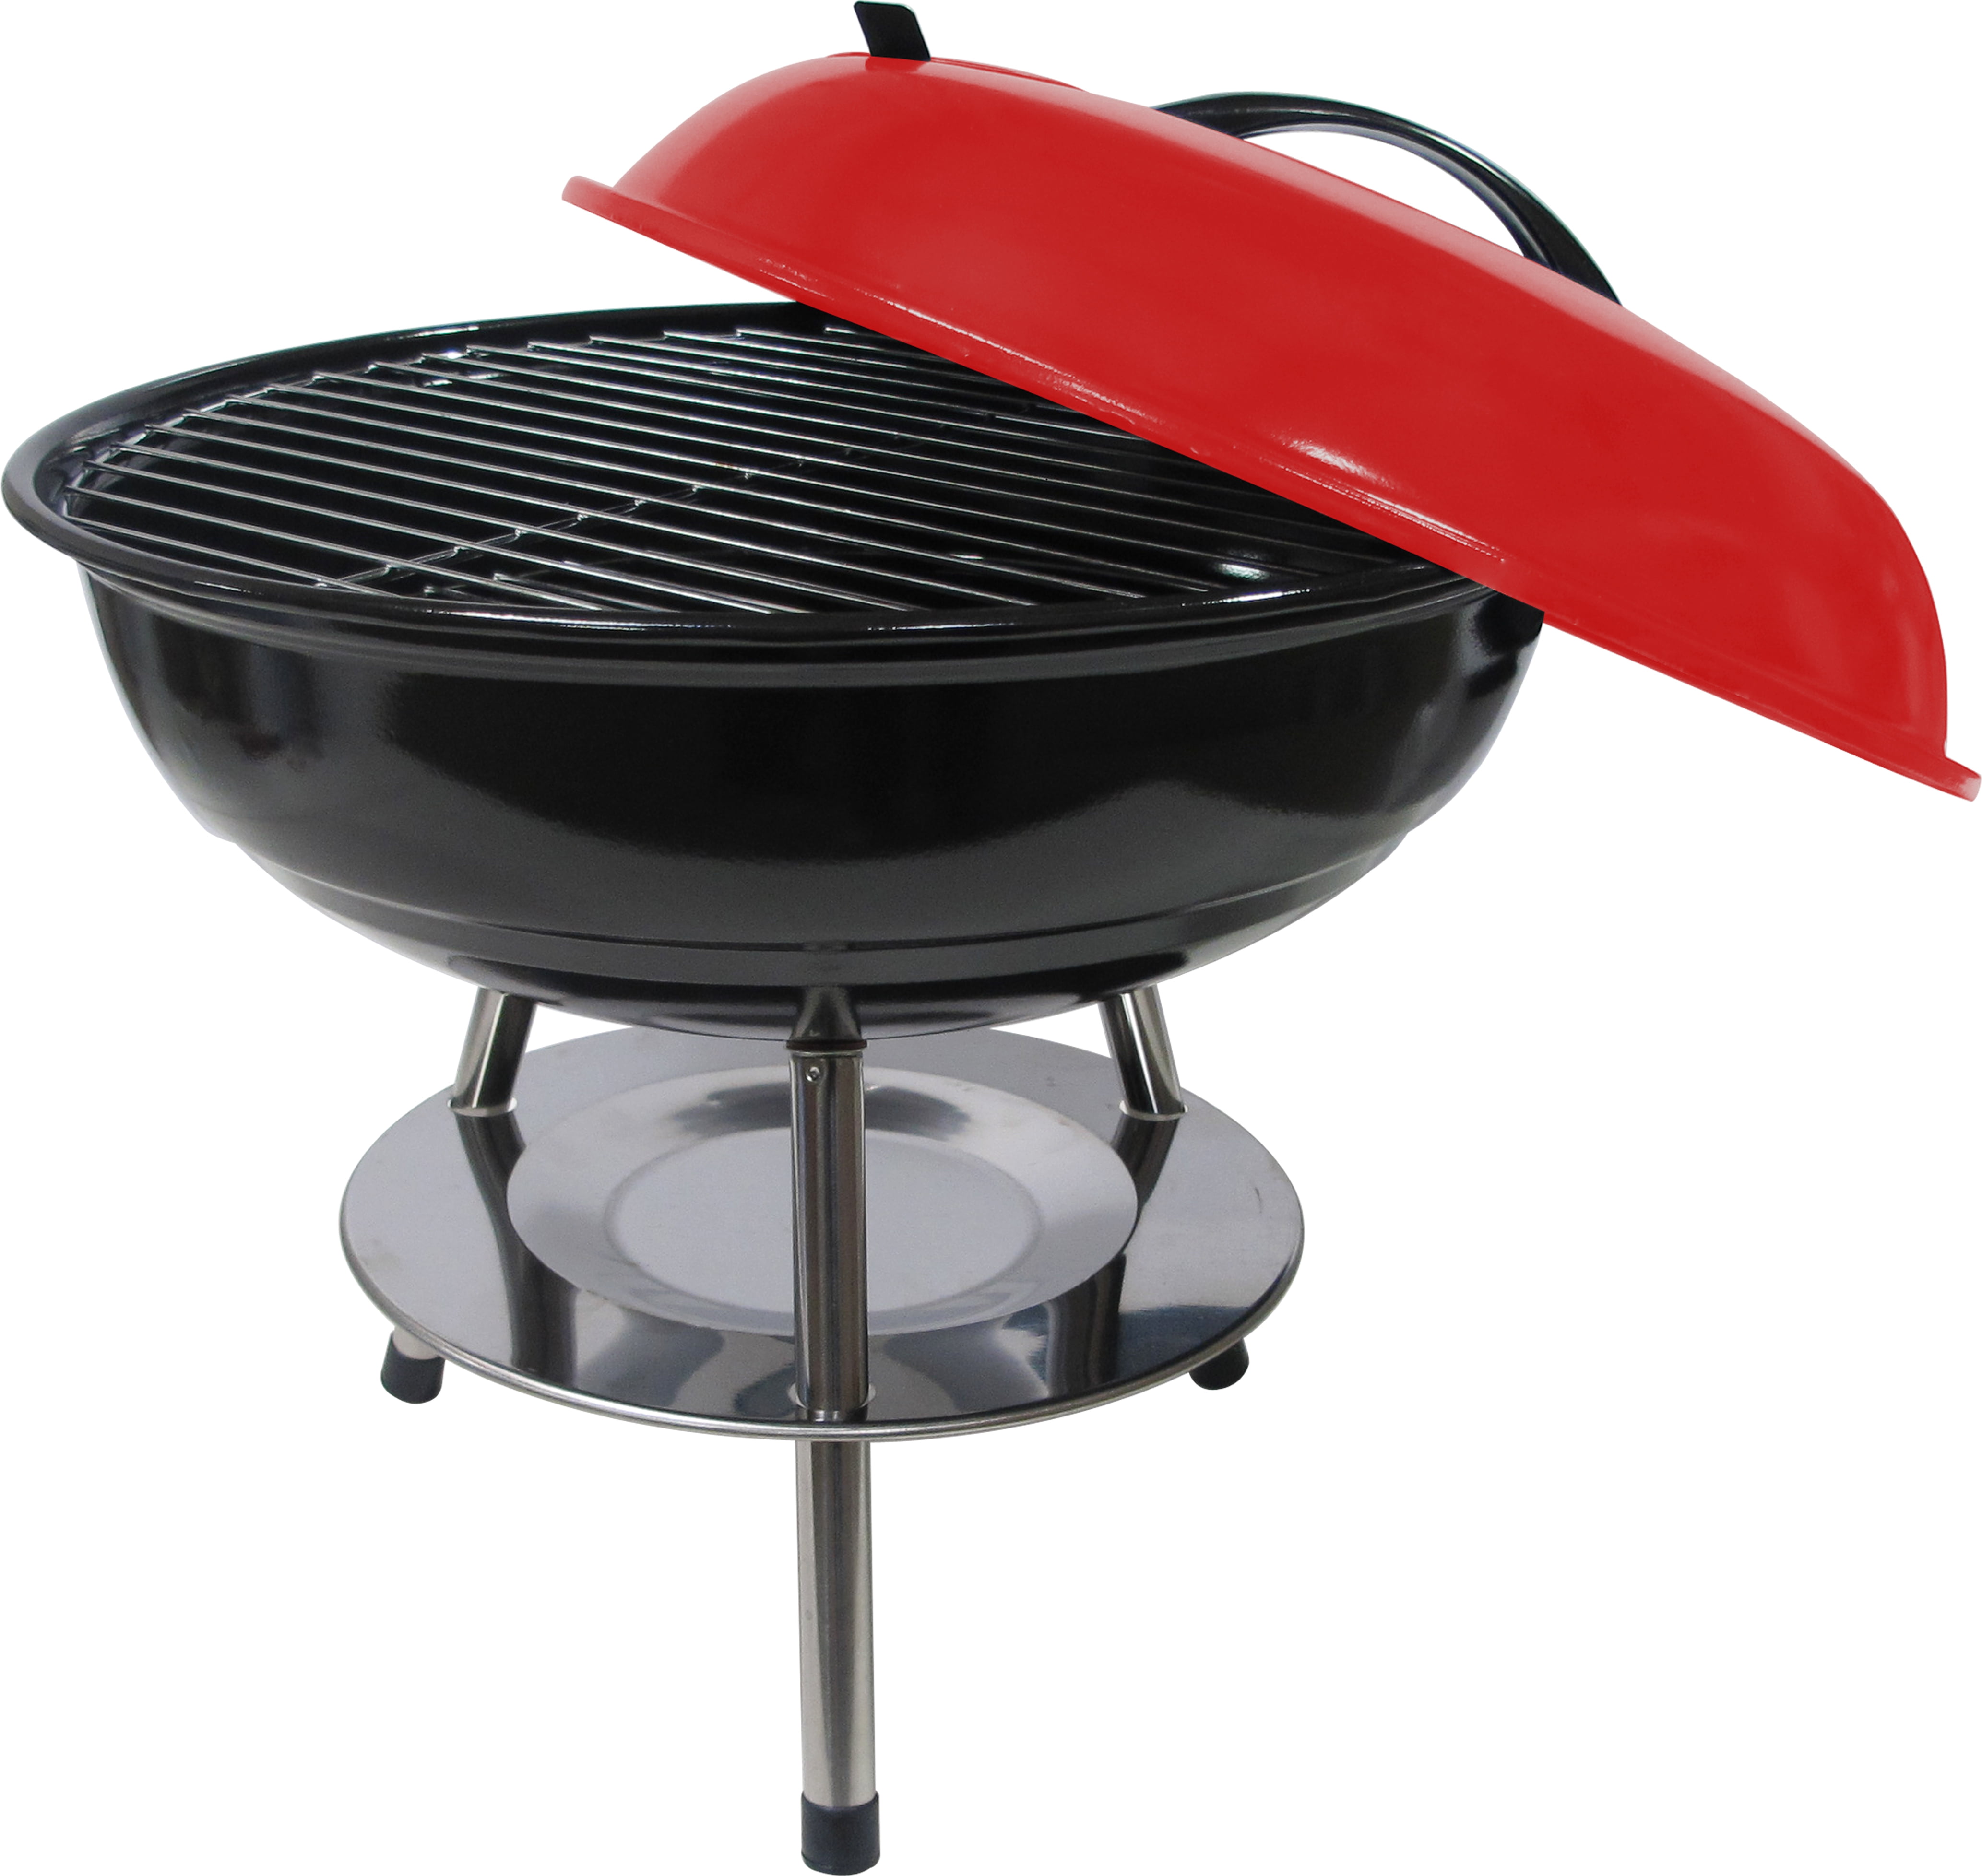 14 INCH ROUND CHARCOAL BARBEQUE BBQ ADJUSTABLE GRILL BARBECUE PORTABLE CAMPING 